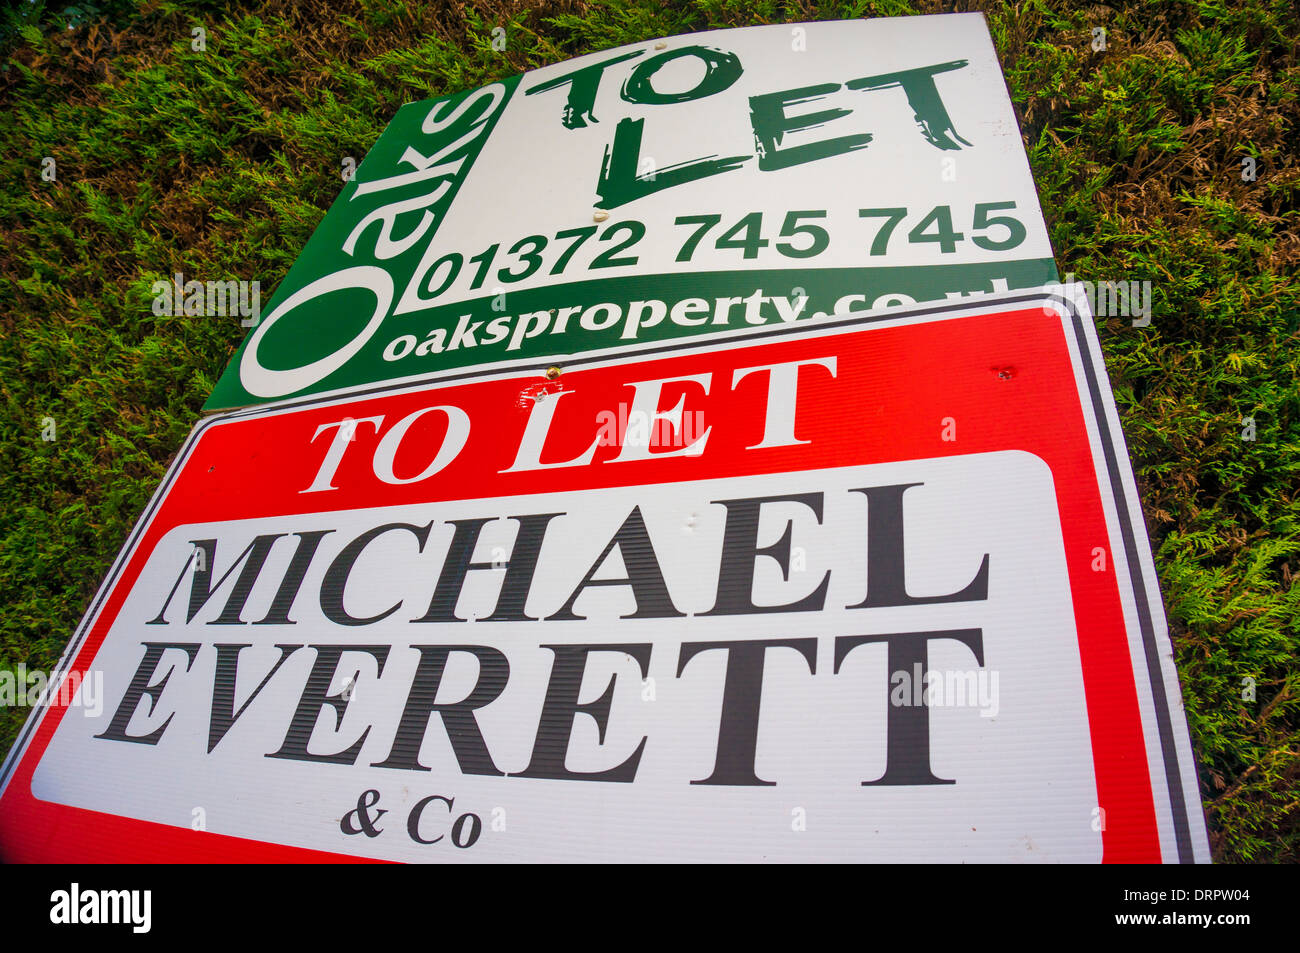 A. house to let sign, in Epsom, Surrey, England, UK. Stock Photo